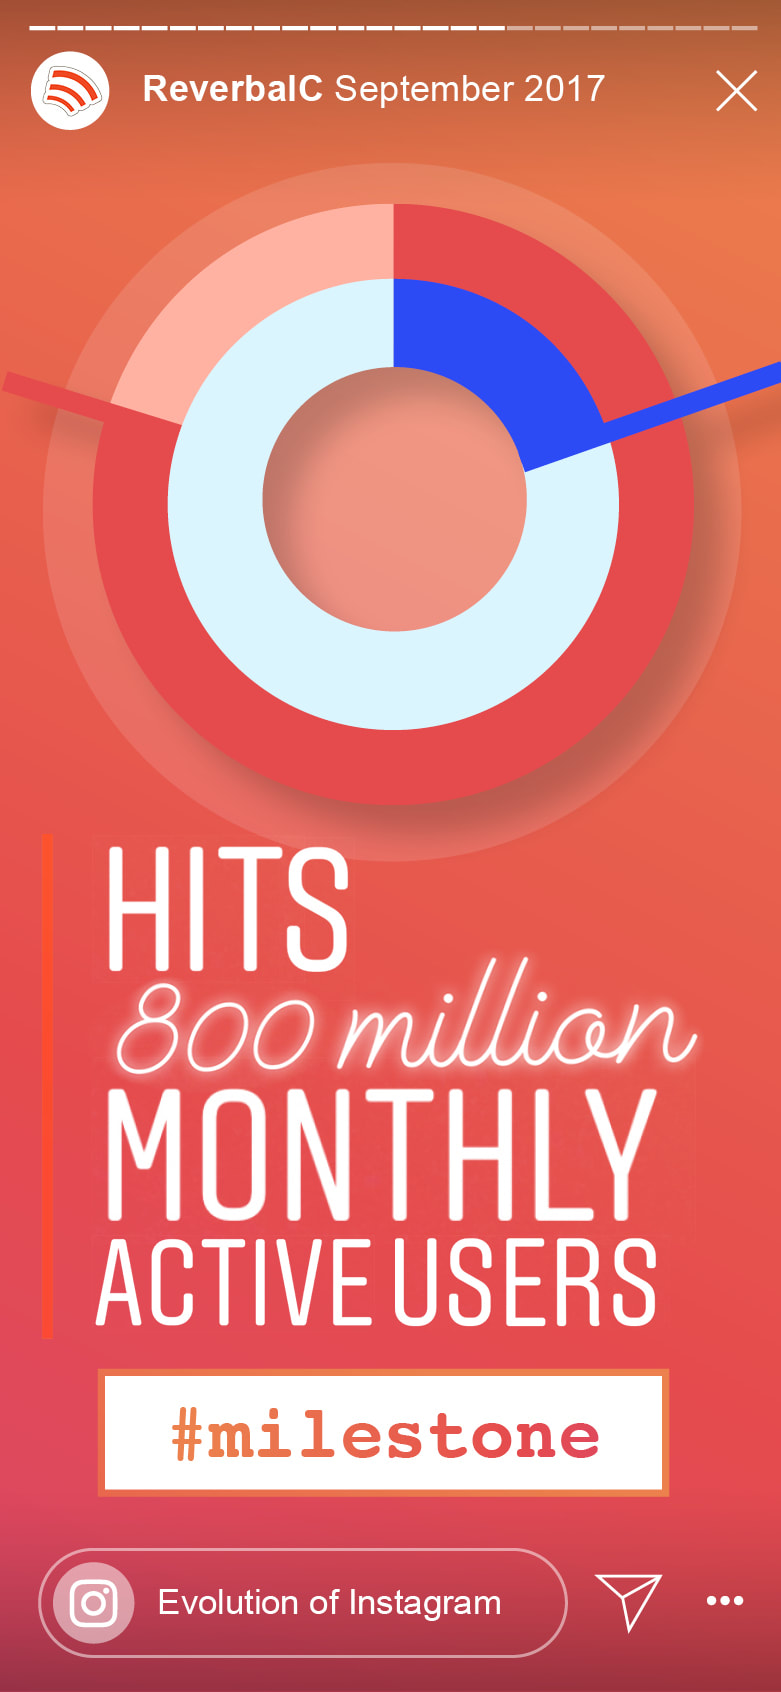 When did Instagram Stories hit 800 million active users?